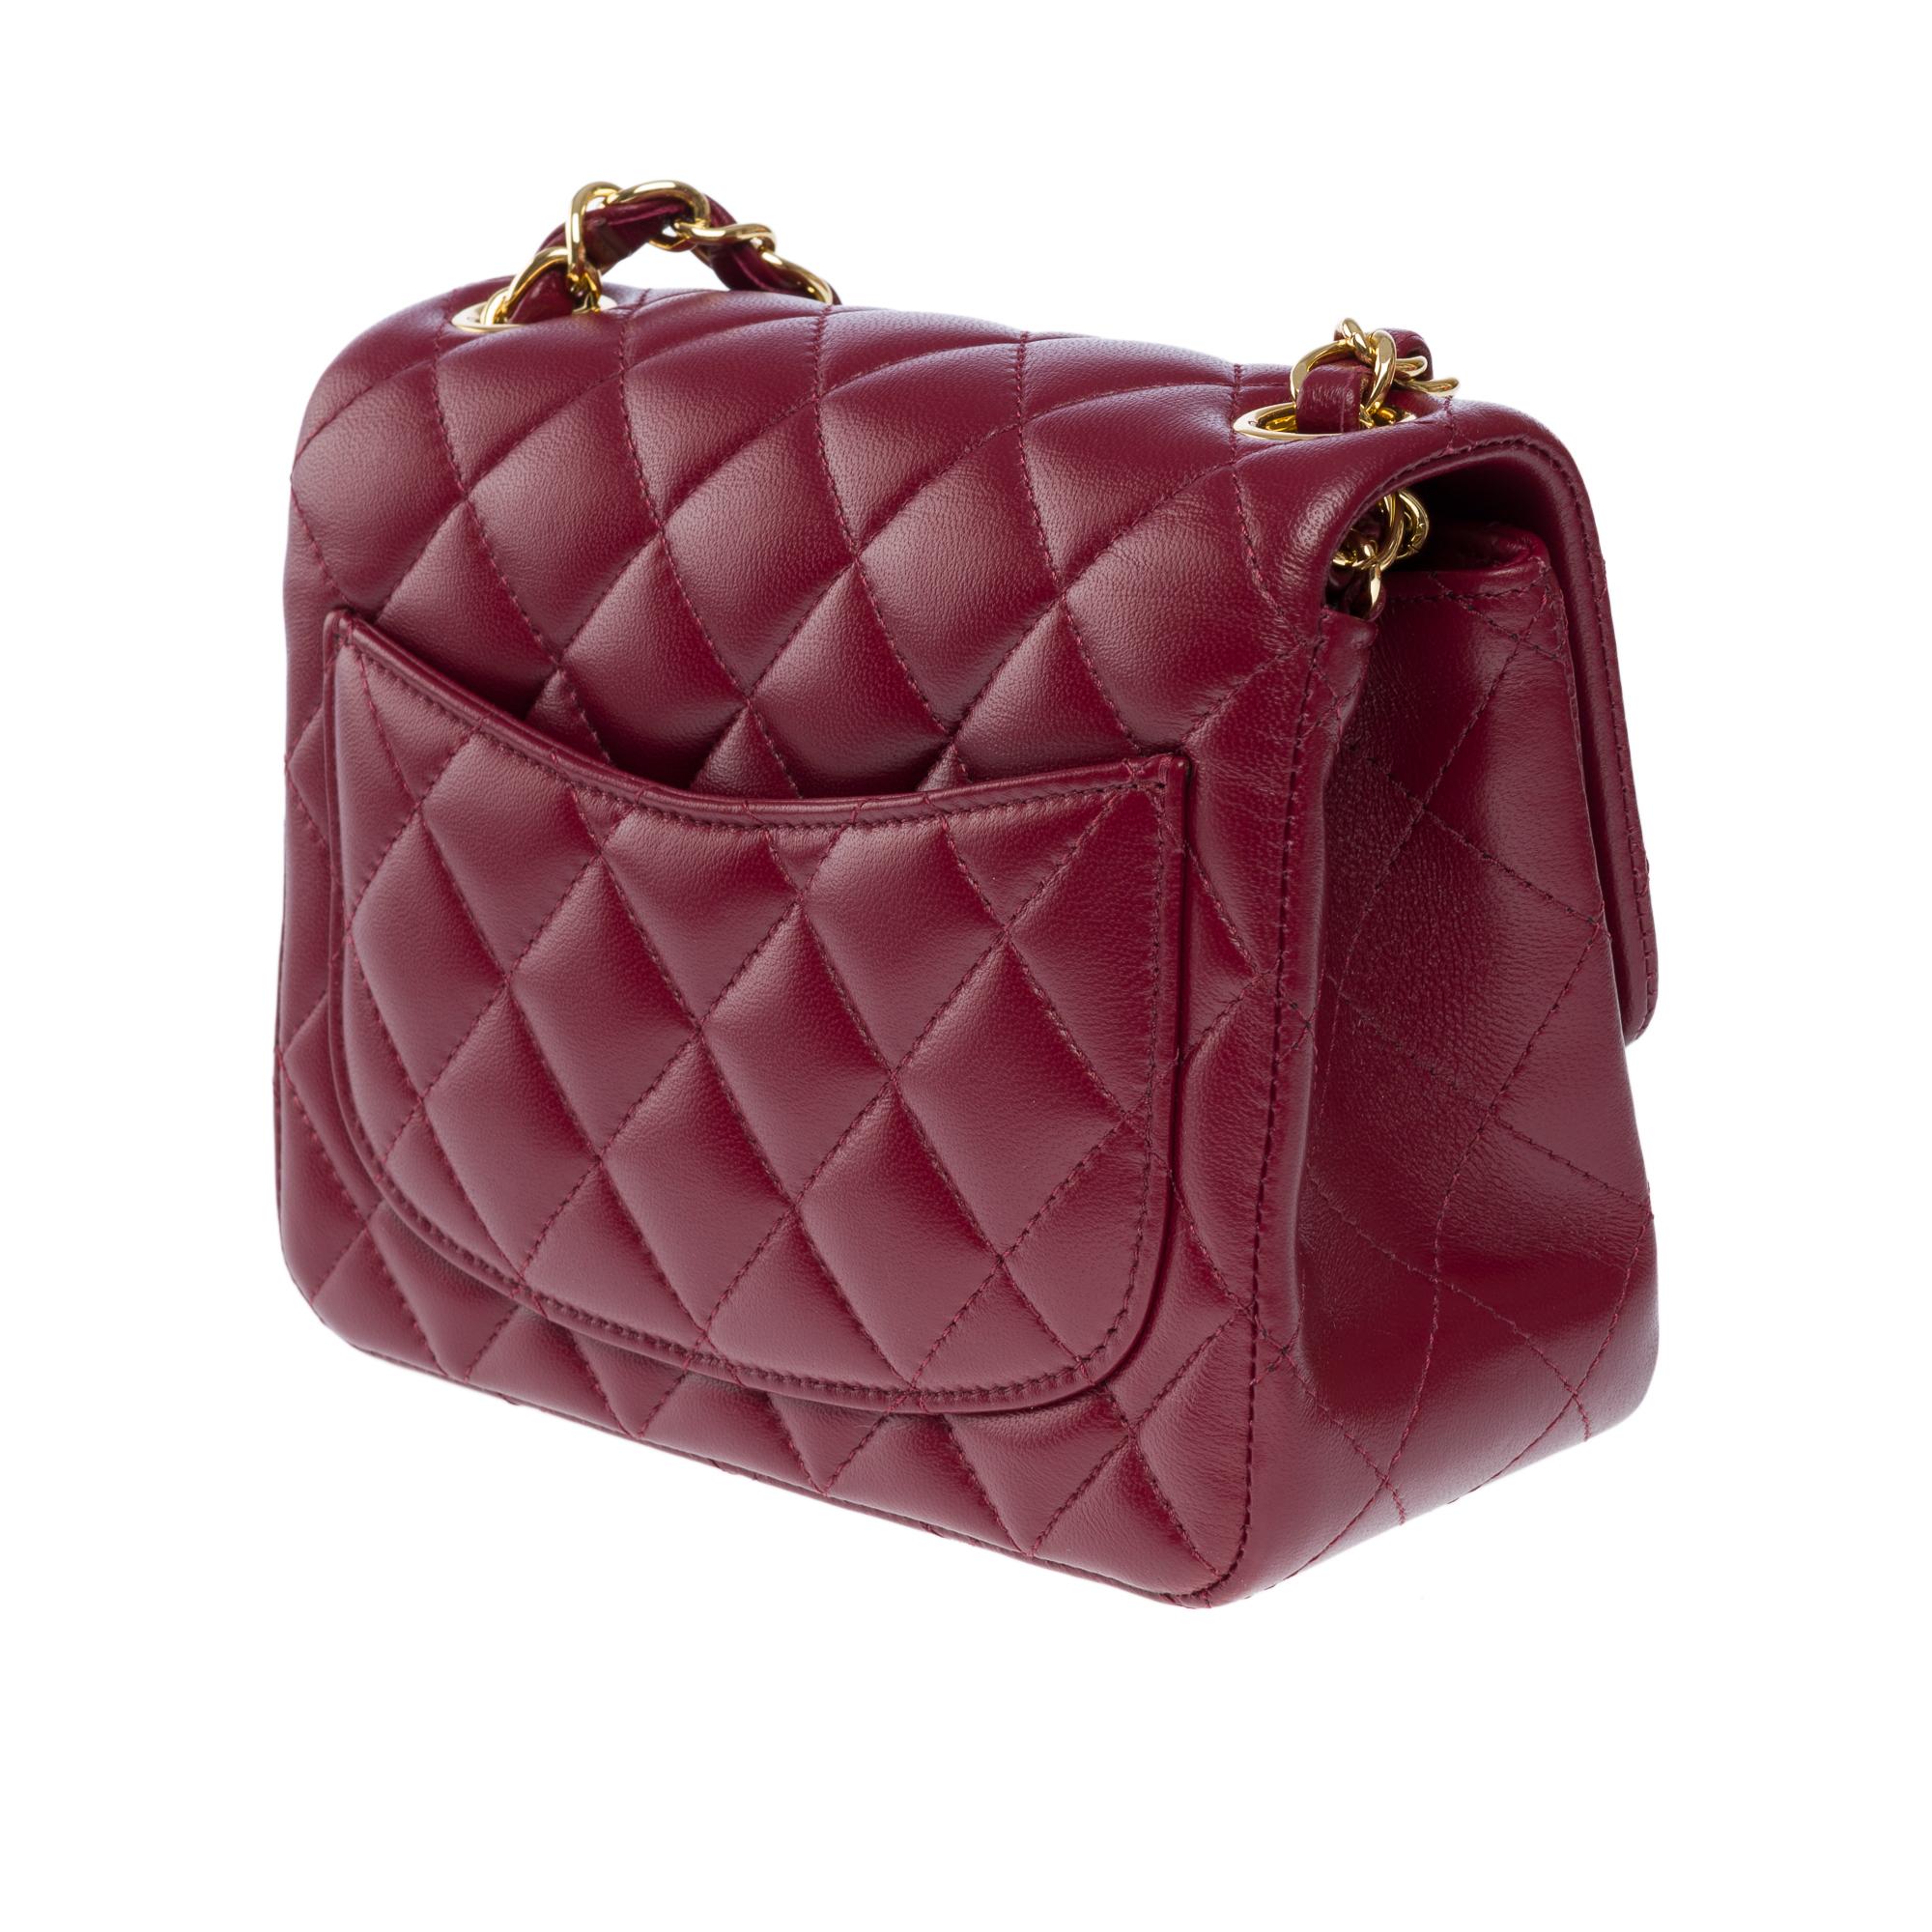 Gorgeous Chanel Mini Timeless Shoulder flap bag in Plum quilted leather, GHW For Sale 2